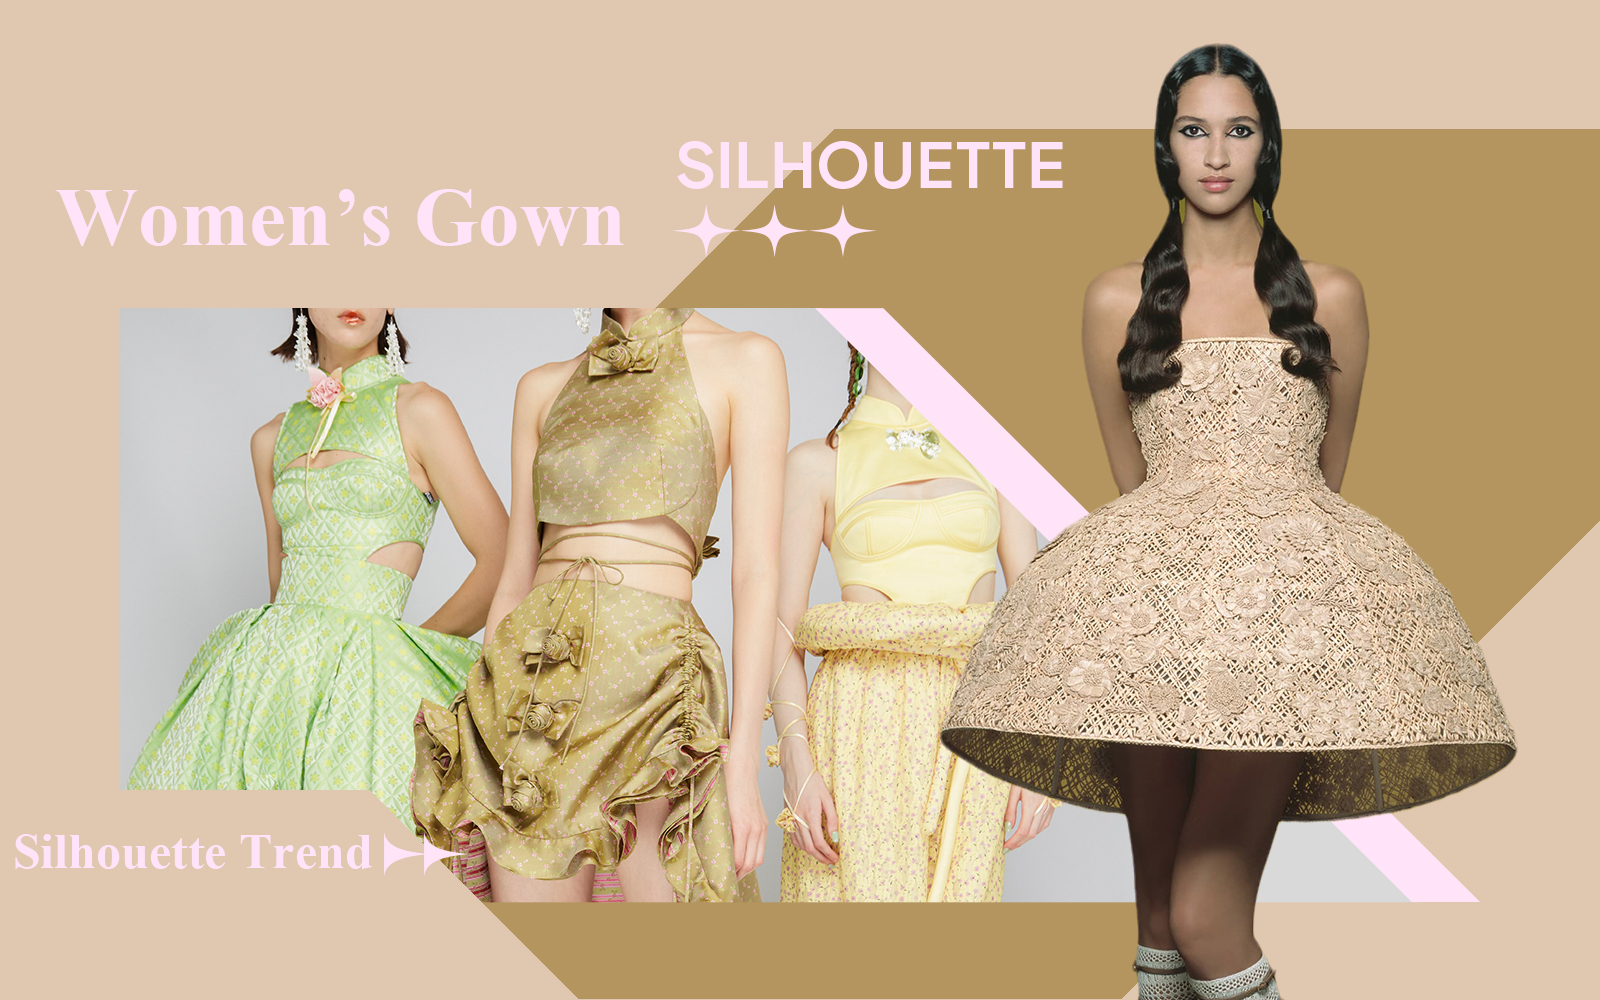 Luxury Haute Couture -- The Silhouette Trend for Women's Gown